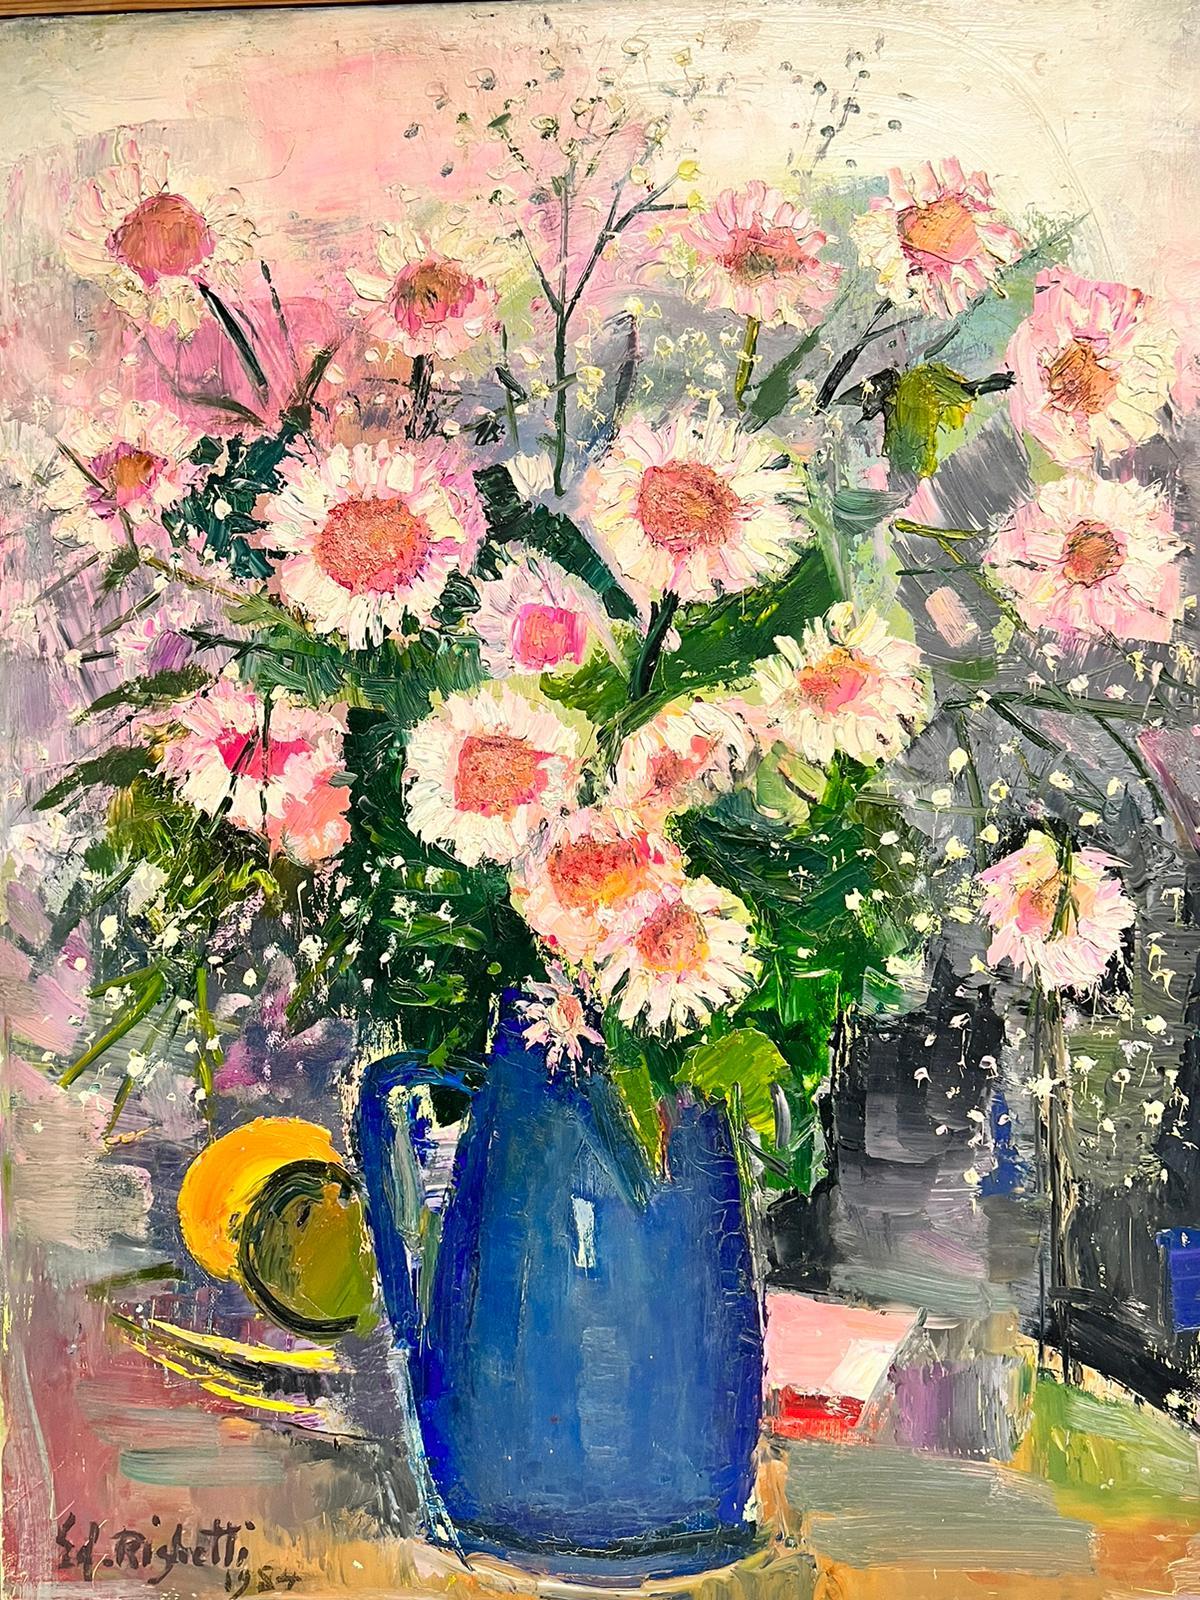 Original French Mid Century Post-Impressionist Oil Pink Flowers in Blue Vase - Painting by Édouard Righetti (1924-2001)